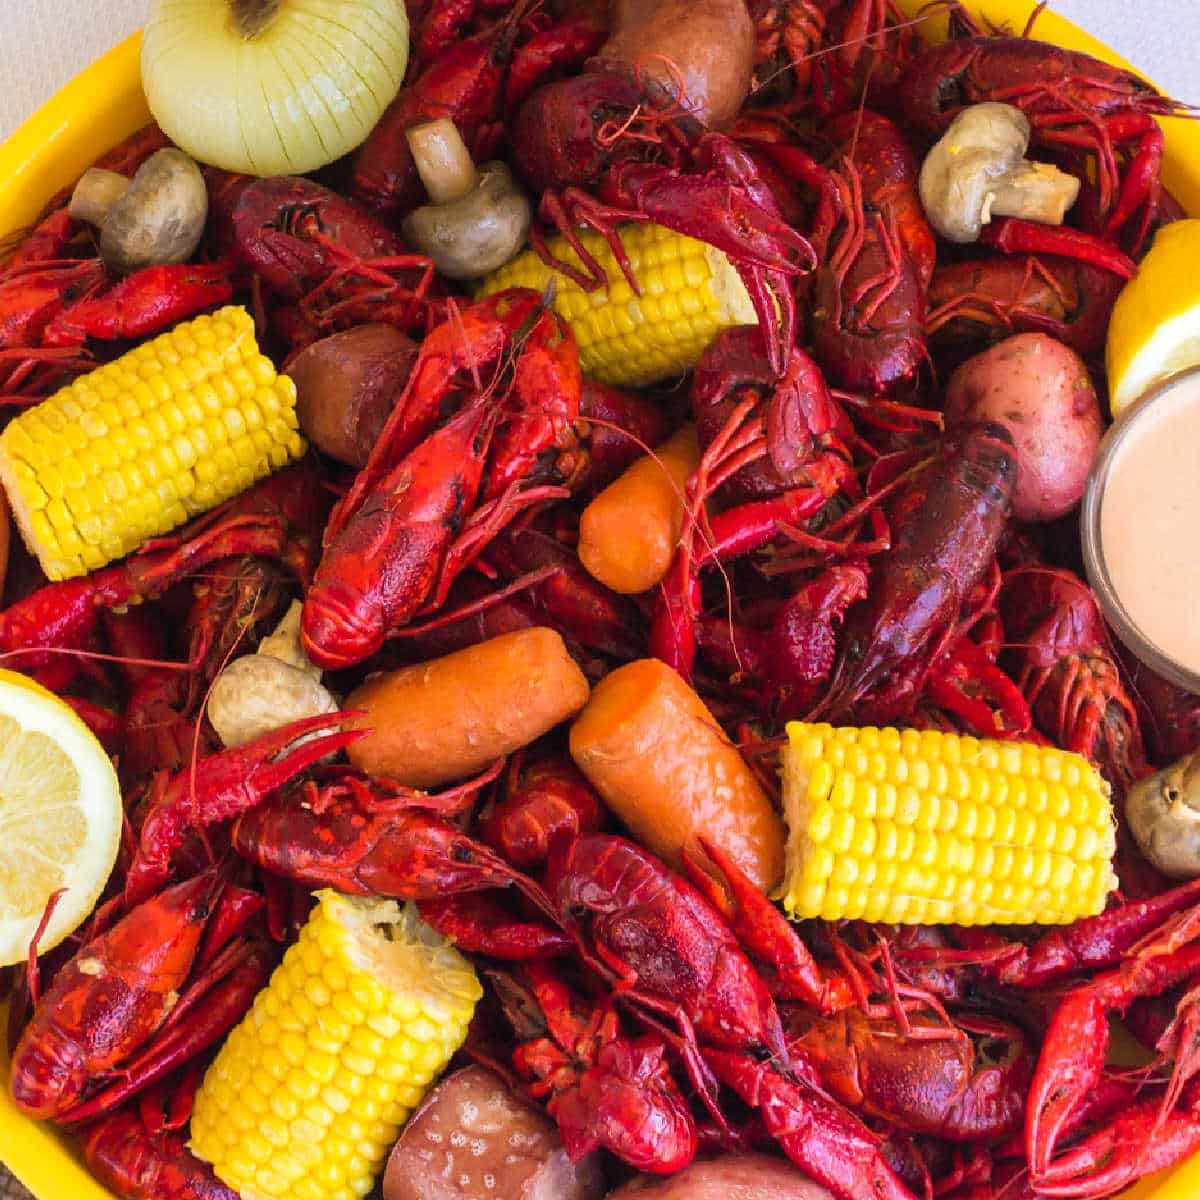 A large platter of boiled crawfish from a crawfish boil, with corn, sausage, potatoes, mushrooms and dip.